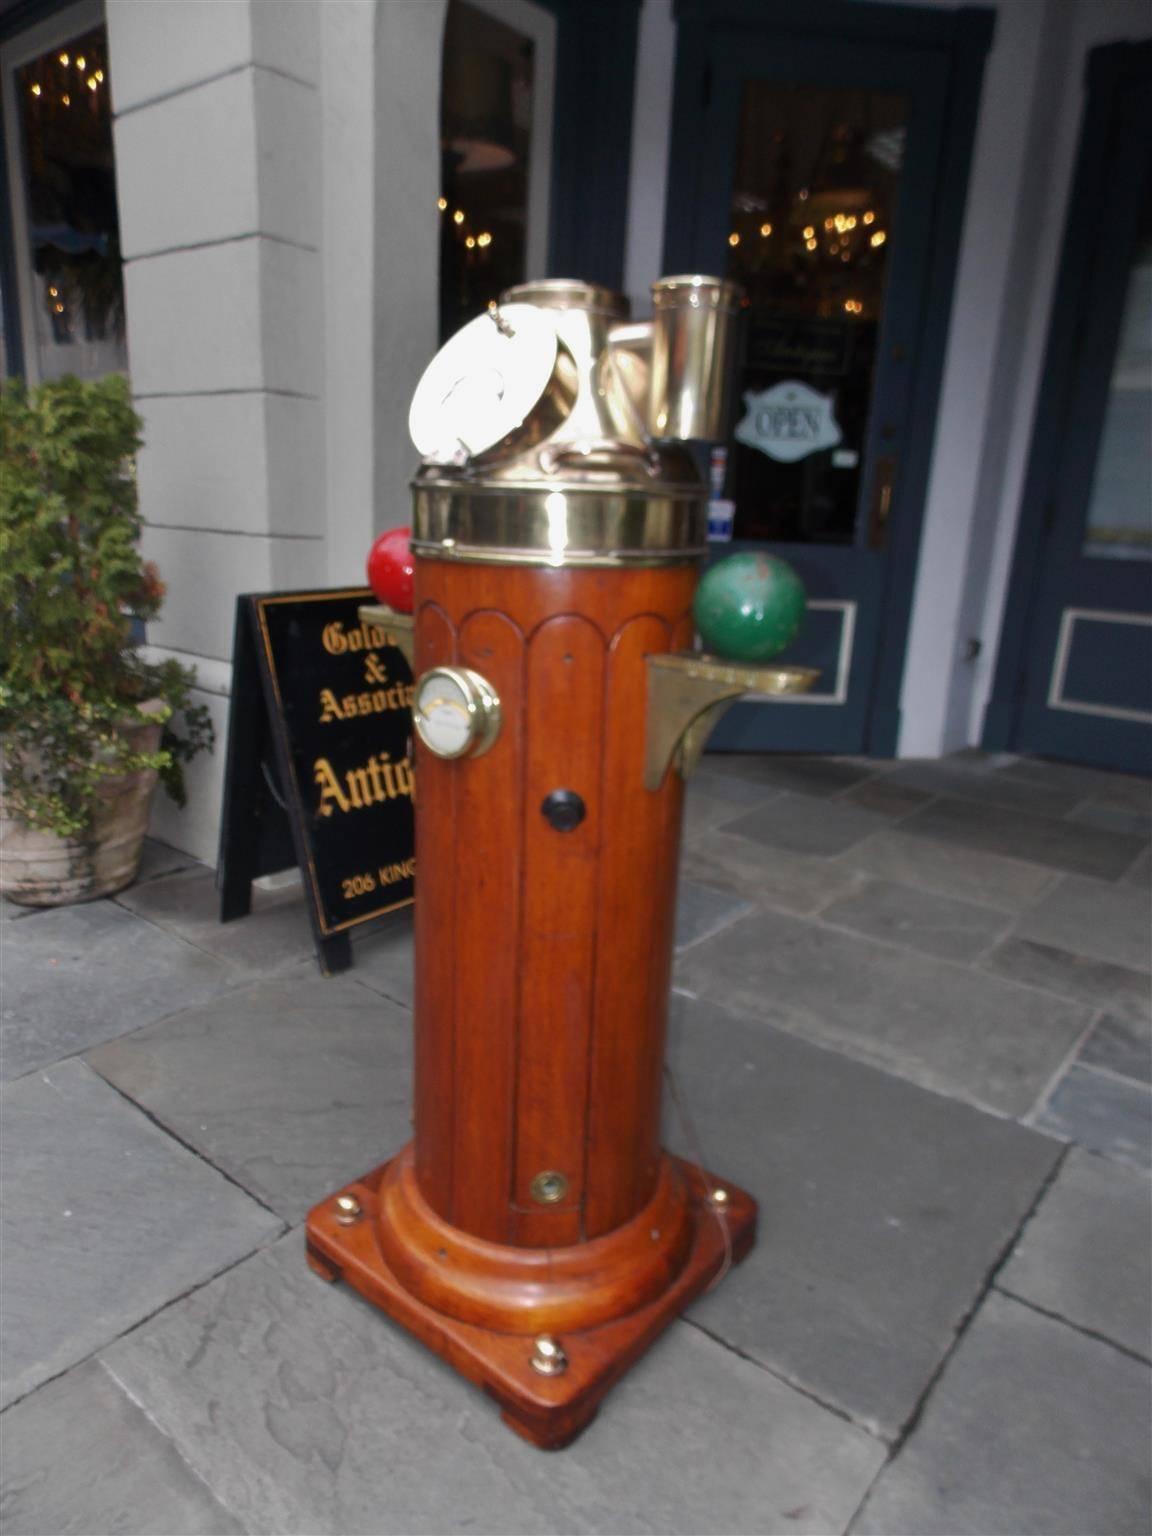 Henry Browne & Son Ltd. was established in the 19th Century in Barking London. This highly desirable and Fine maritime instrument is made of carved mahogany and brass with a helmet style compass cover and flindler's tube with a CAP. It was deck